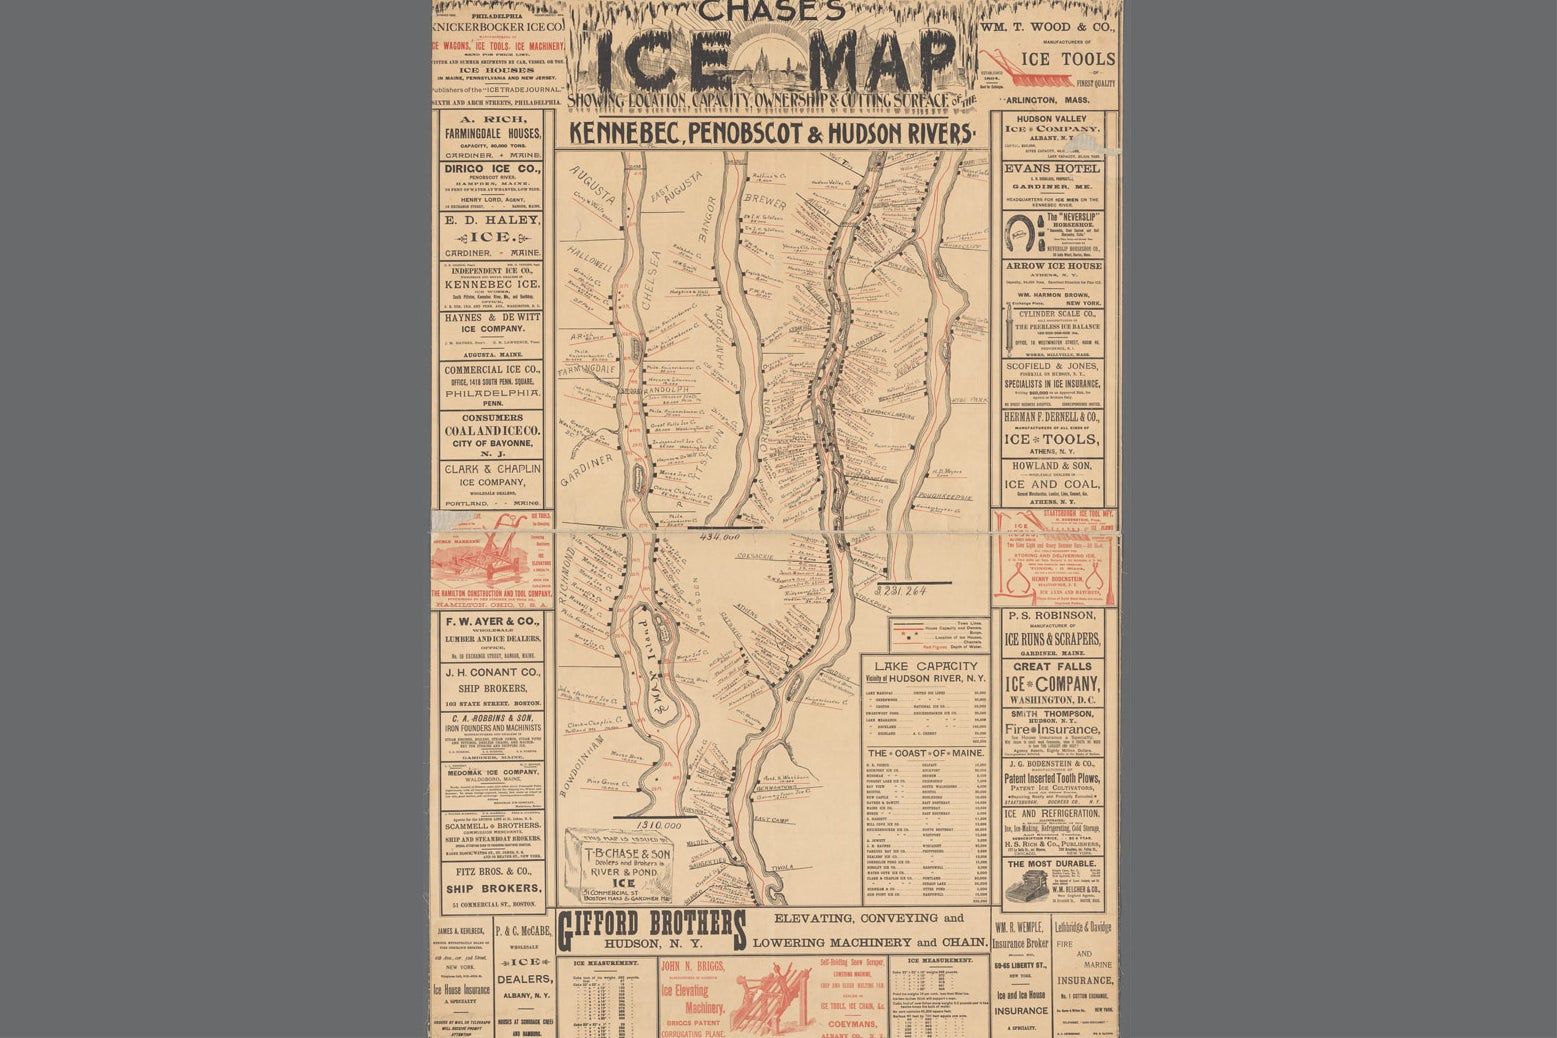 A map of Northeastern rivers showing the ice industry in the late  nineteenth century.